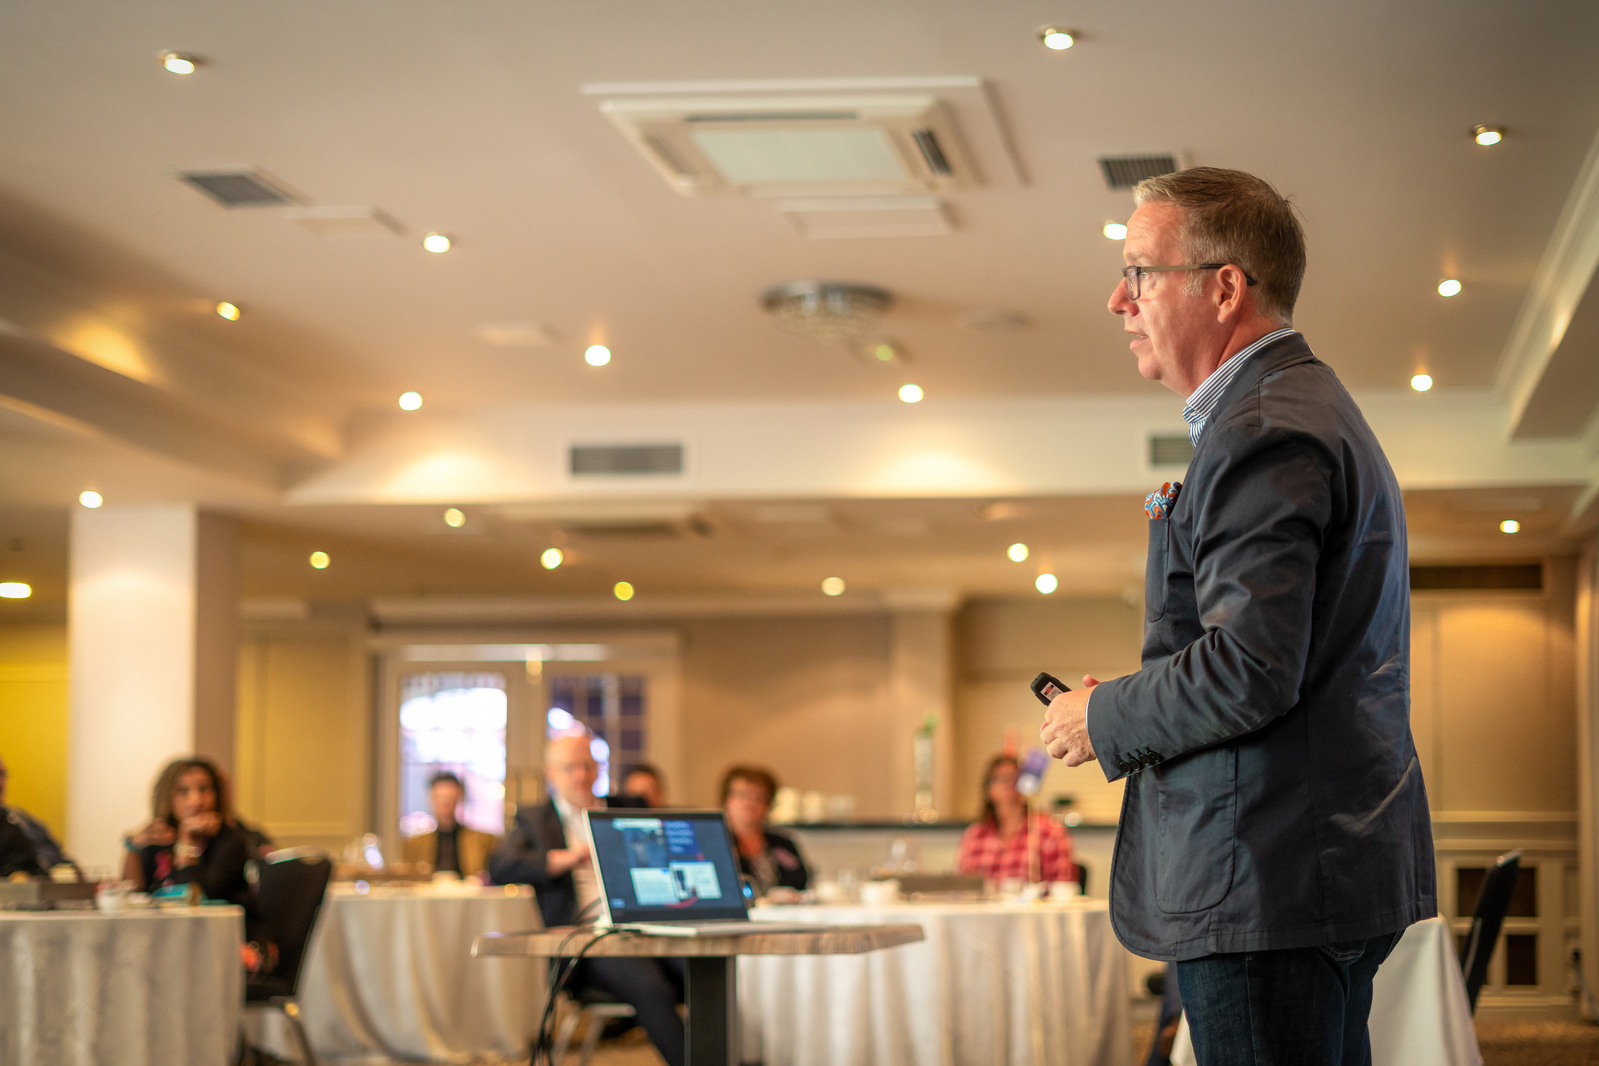 Guest speaker at corporate event in Scotland- Photography by Nate Cleary